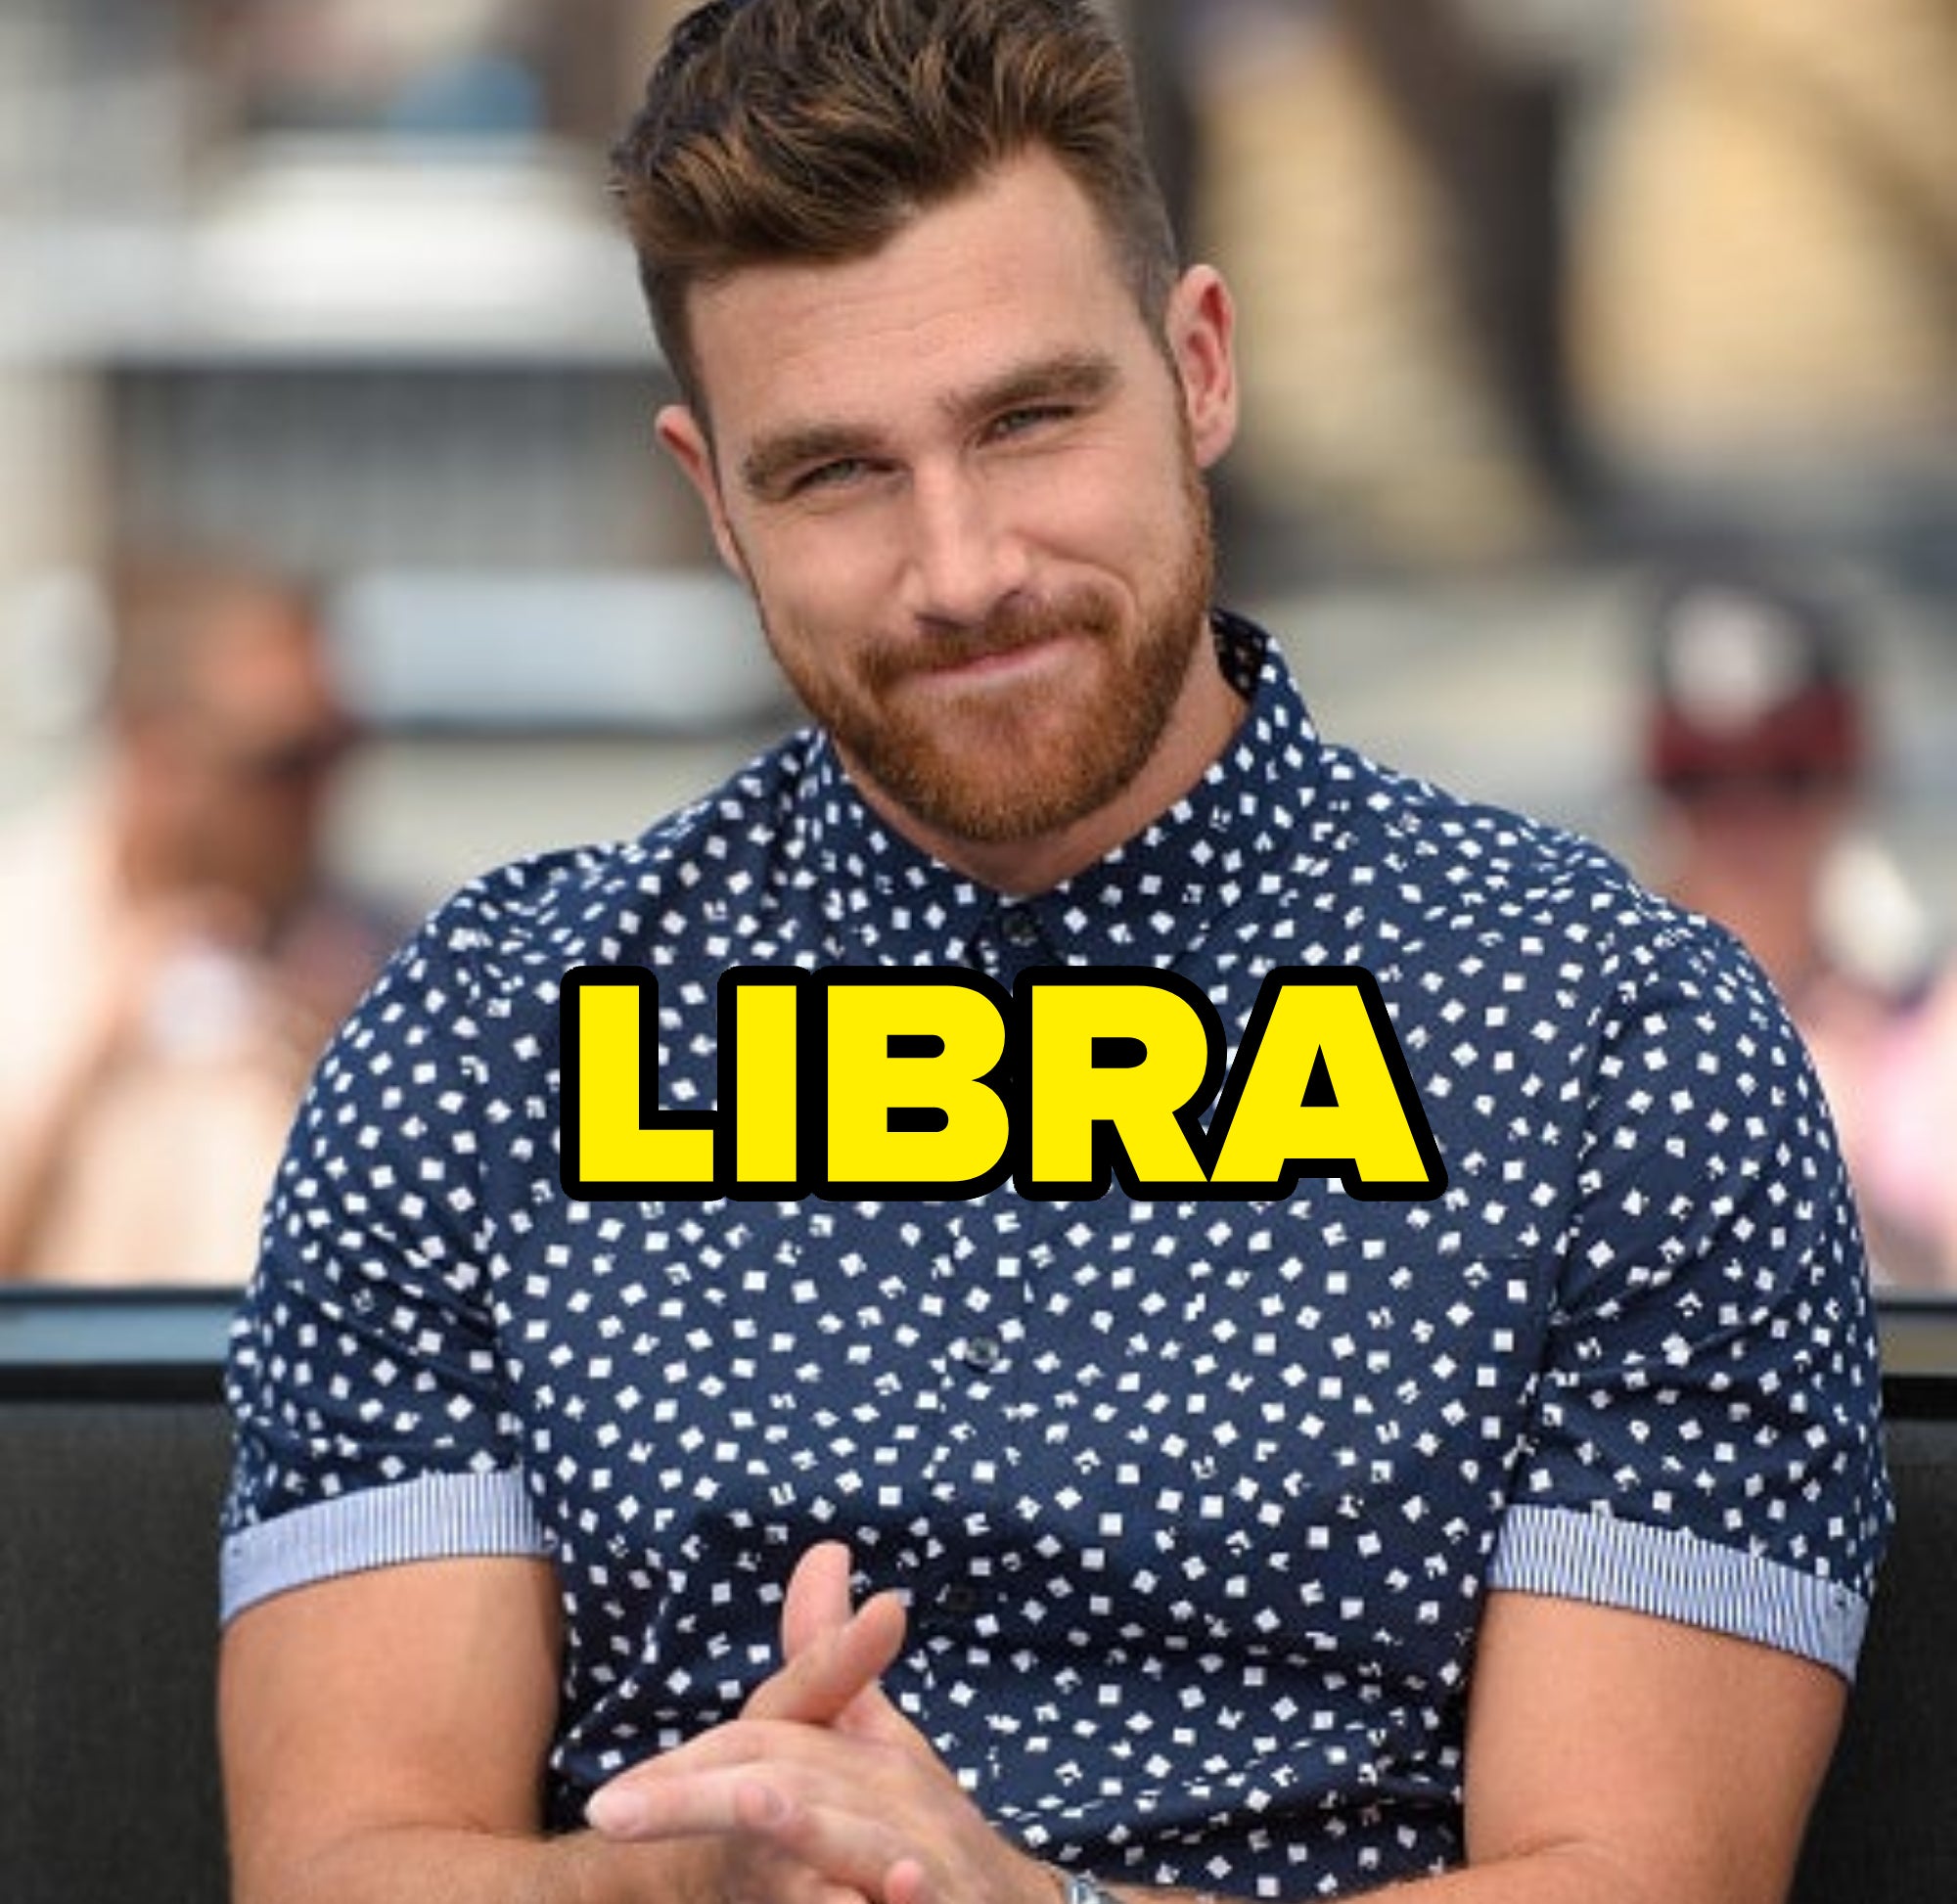 libra written over a photo of him in a polka dot shirt grinning